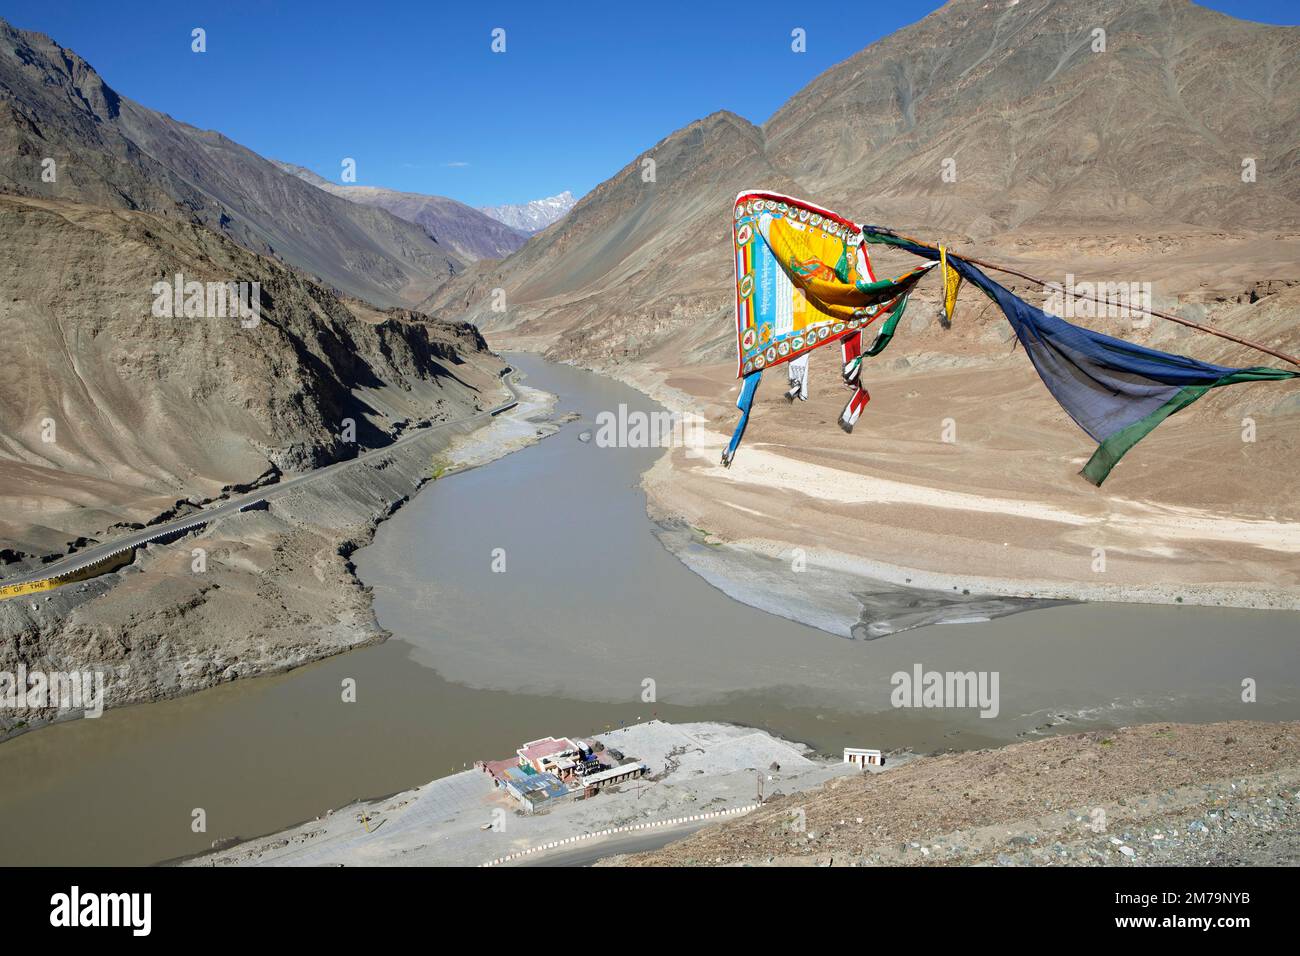 Confluence of the Indus and Zanskar rivers in the Himalayas, prayer flag in front, Indus Valley, Ladakh, India Stock Photo